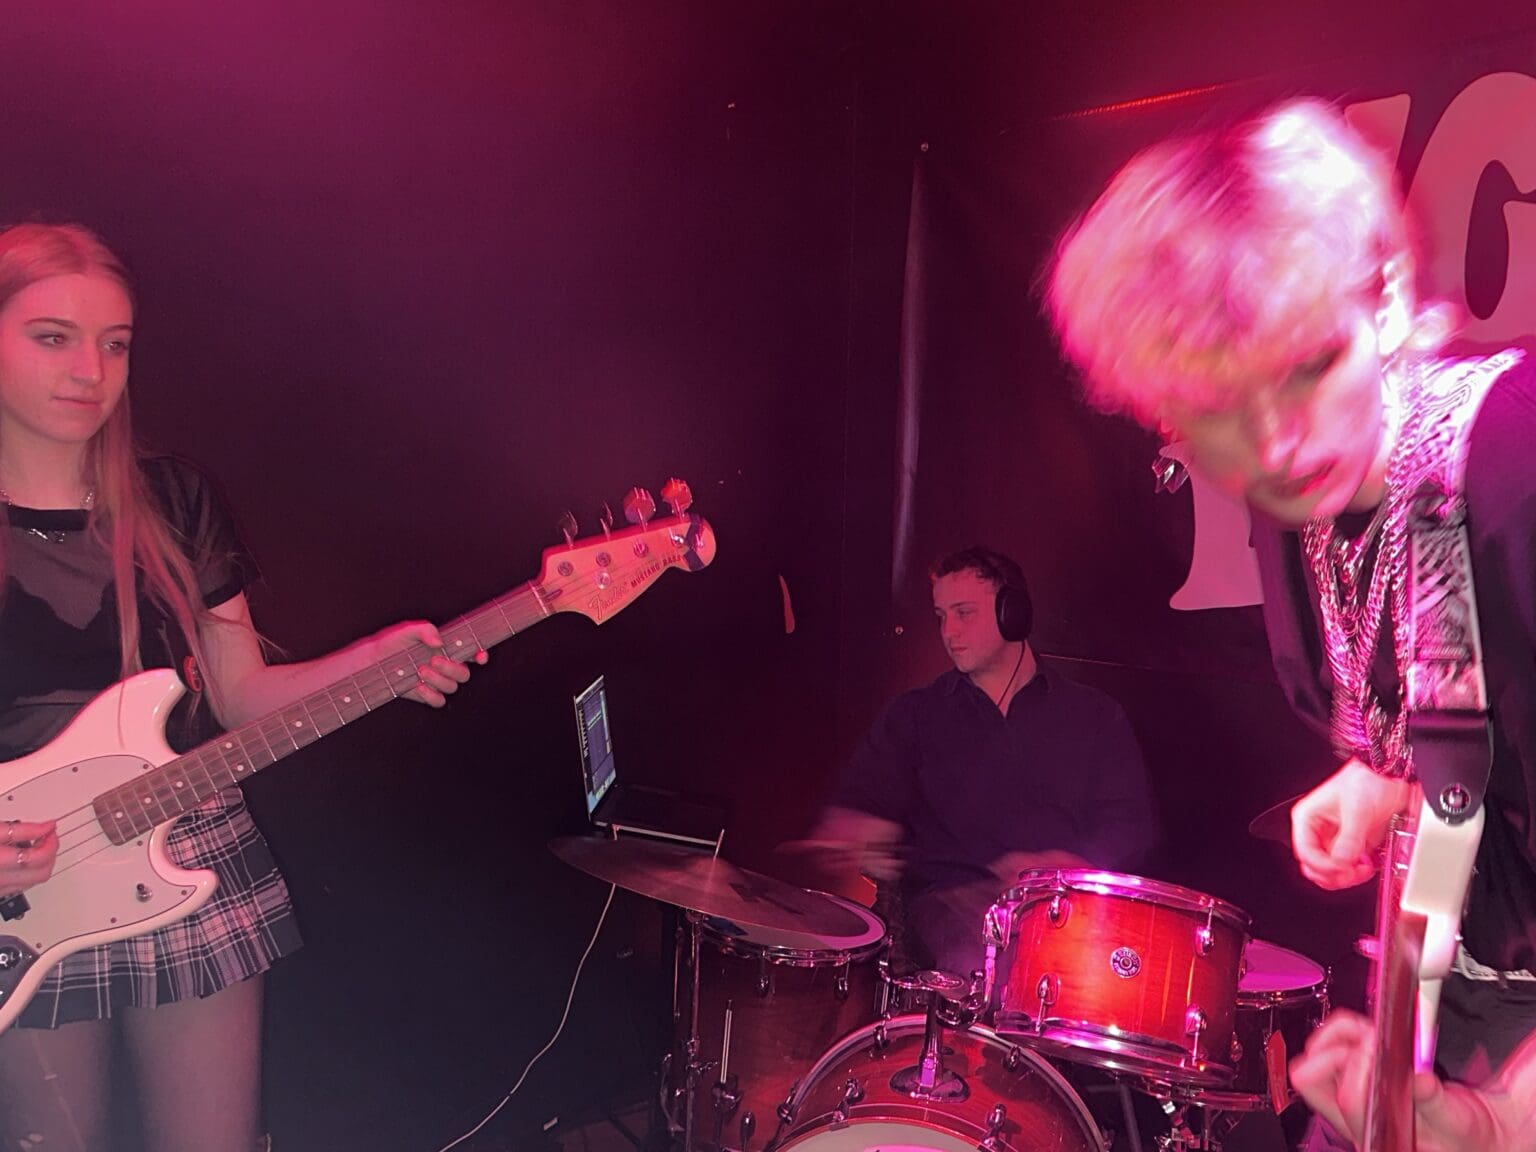 Band members of Girls Knows playing their instruments under a bright pink light.